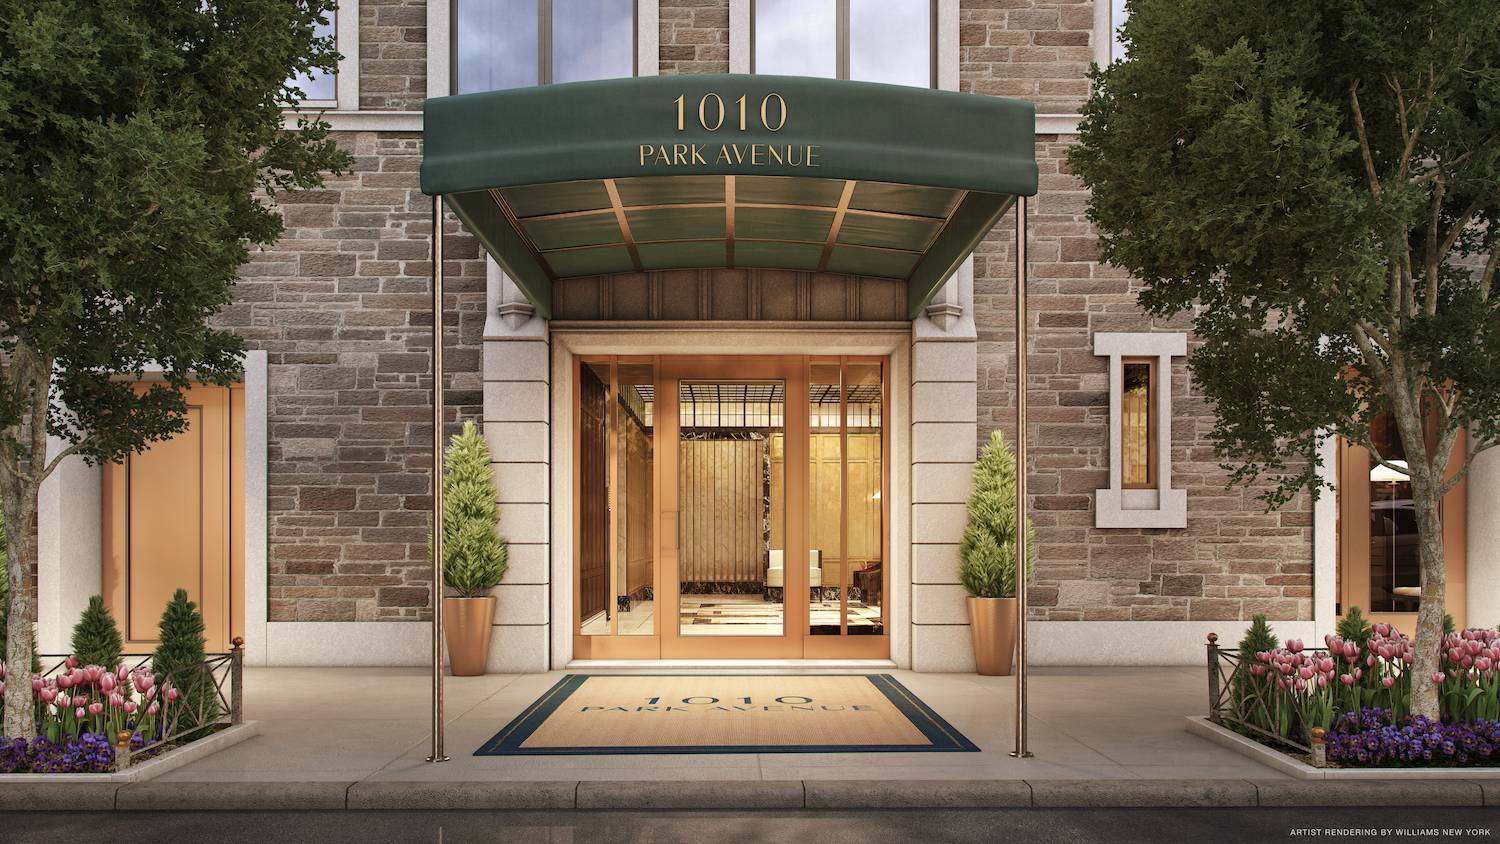 Ideally located at the center of the Upper East Side's Gold Coast and just steps from Central Park and Museum Mile, 1010 Park Avenue is one of New York's most ...